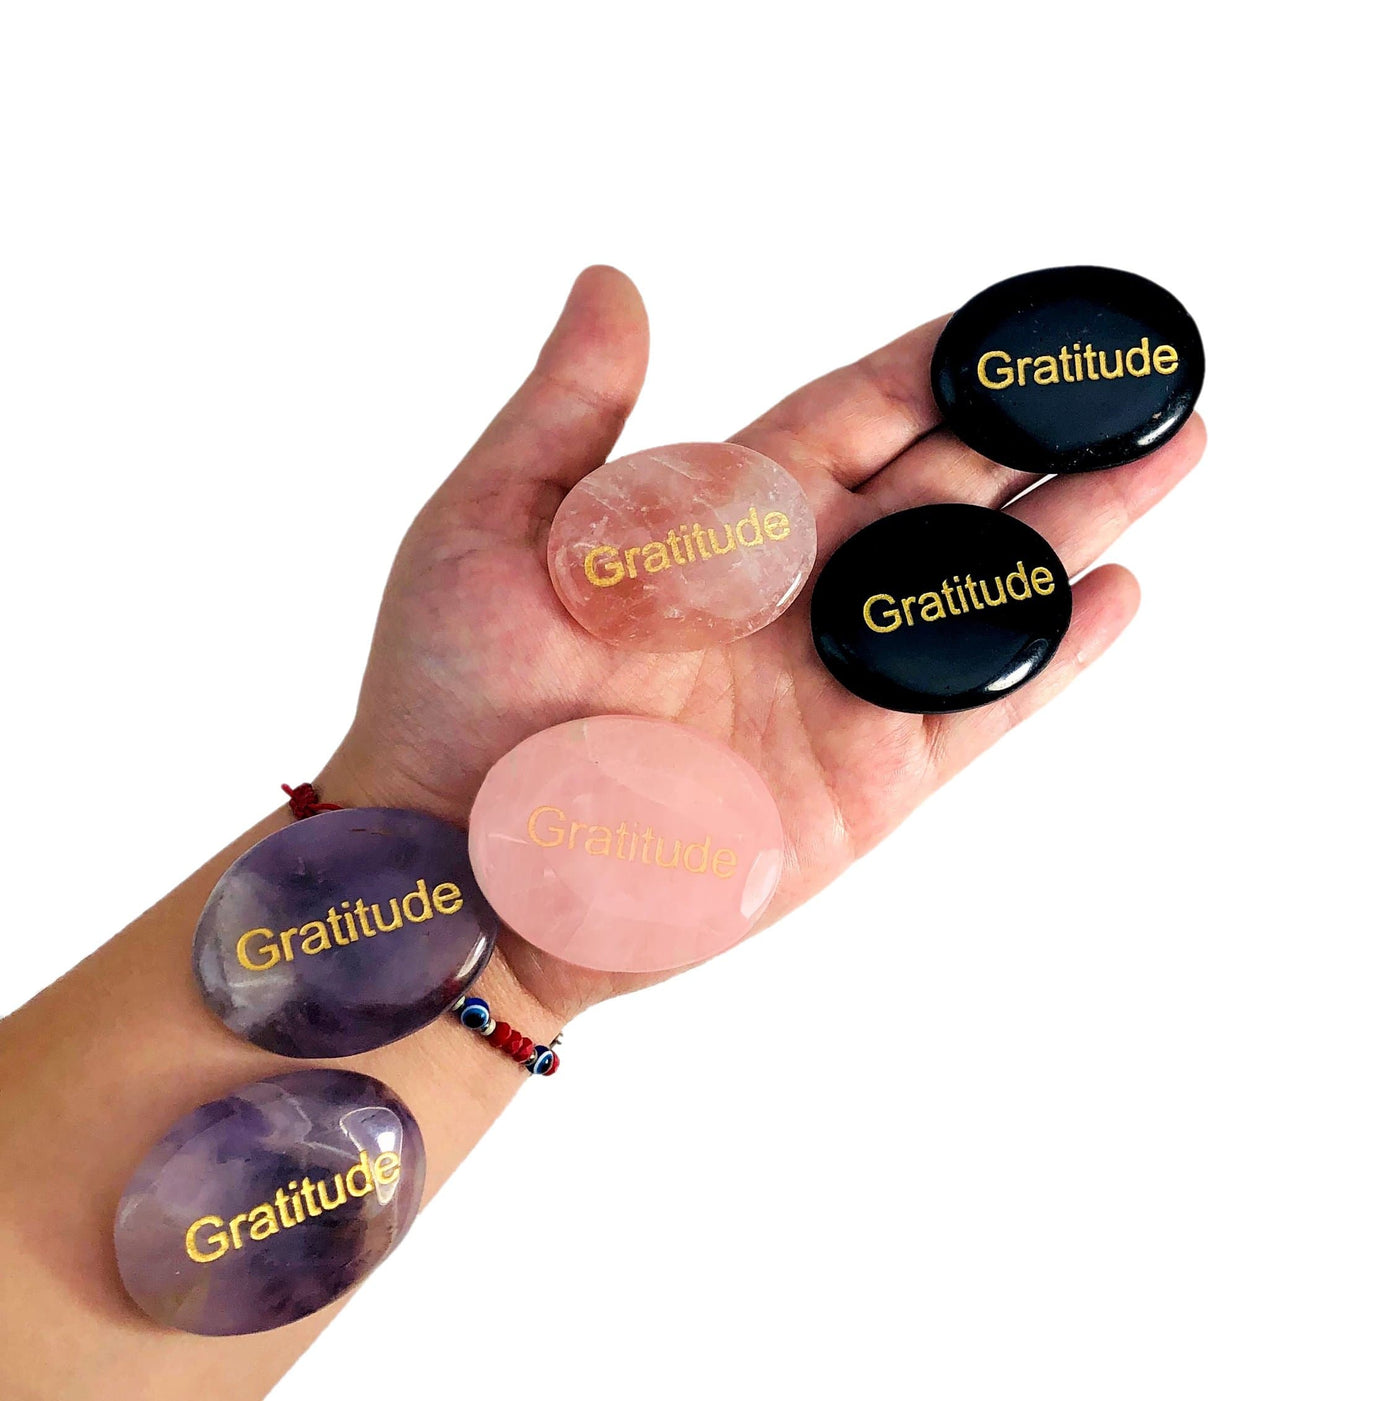 Pocket Stone "Gratitude" Palm Stones, two of each kind, laid out on woman's hand and arm.